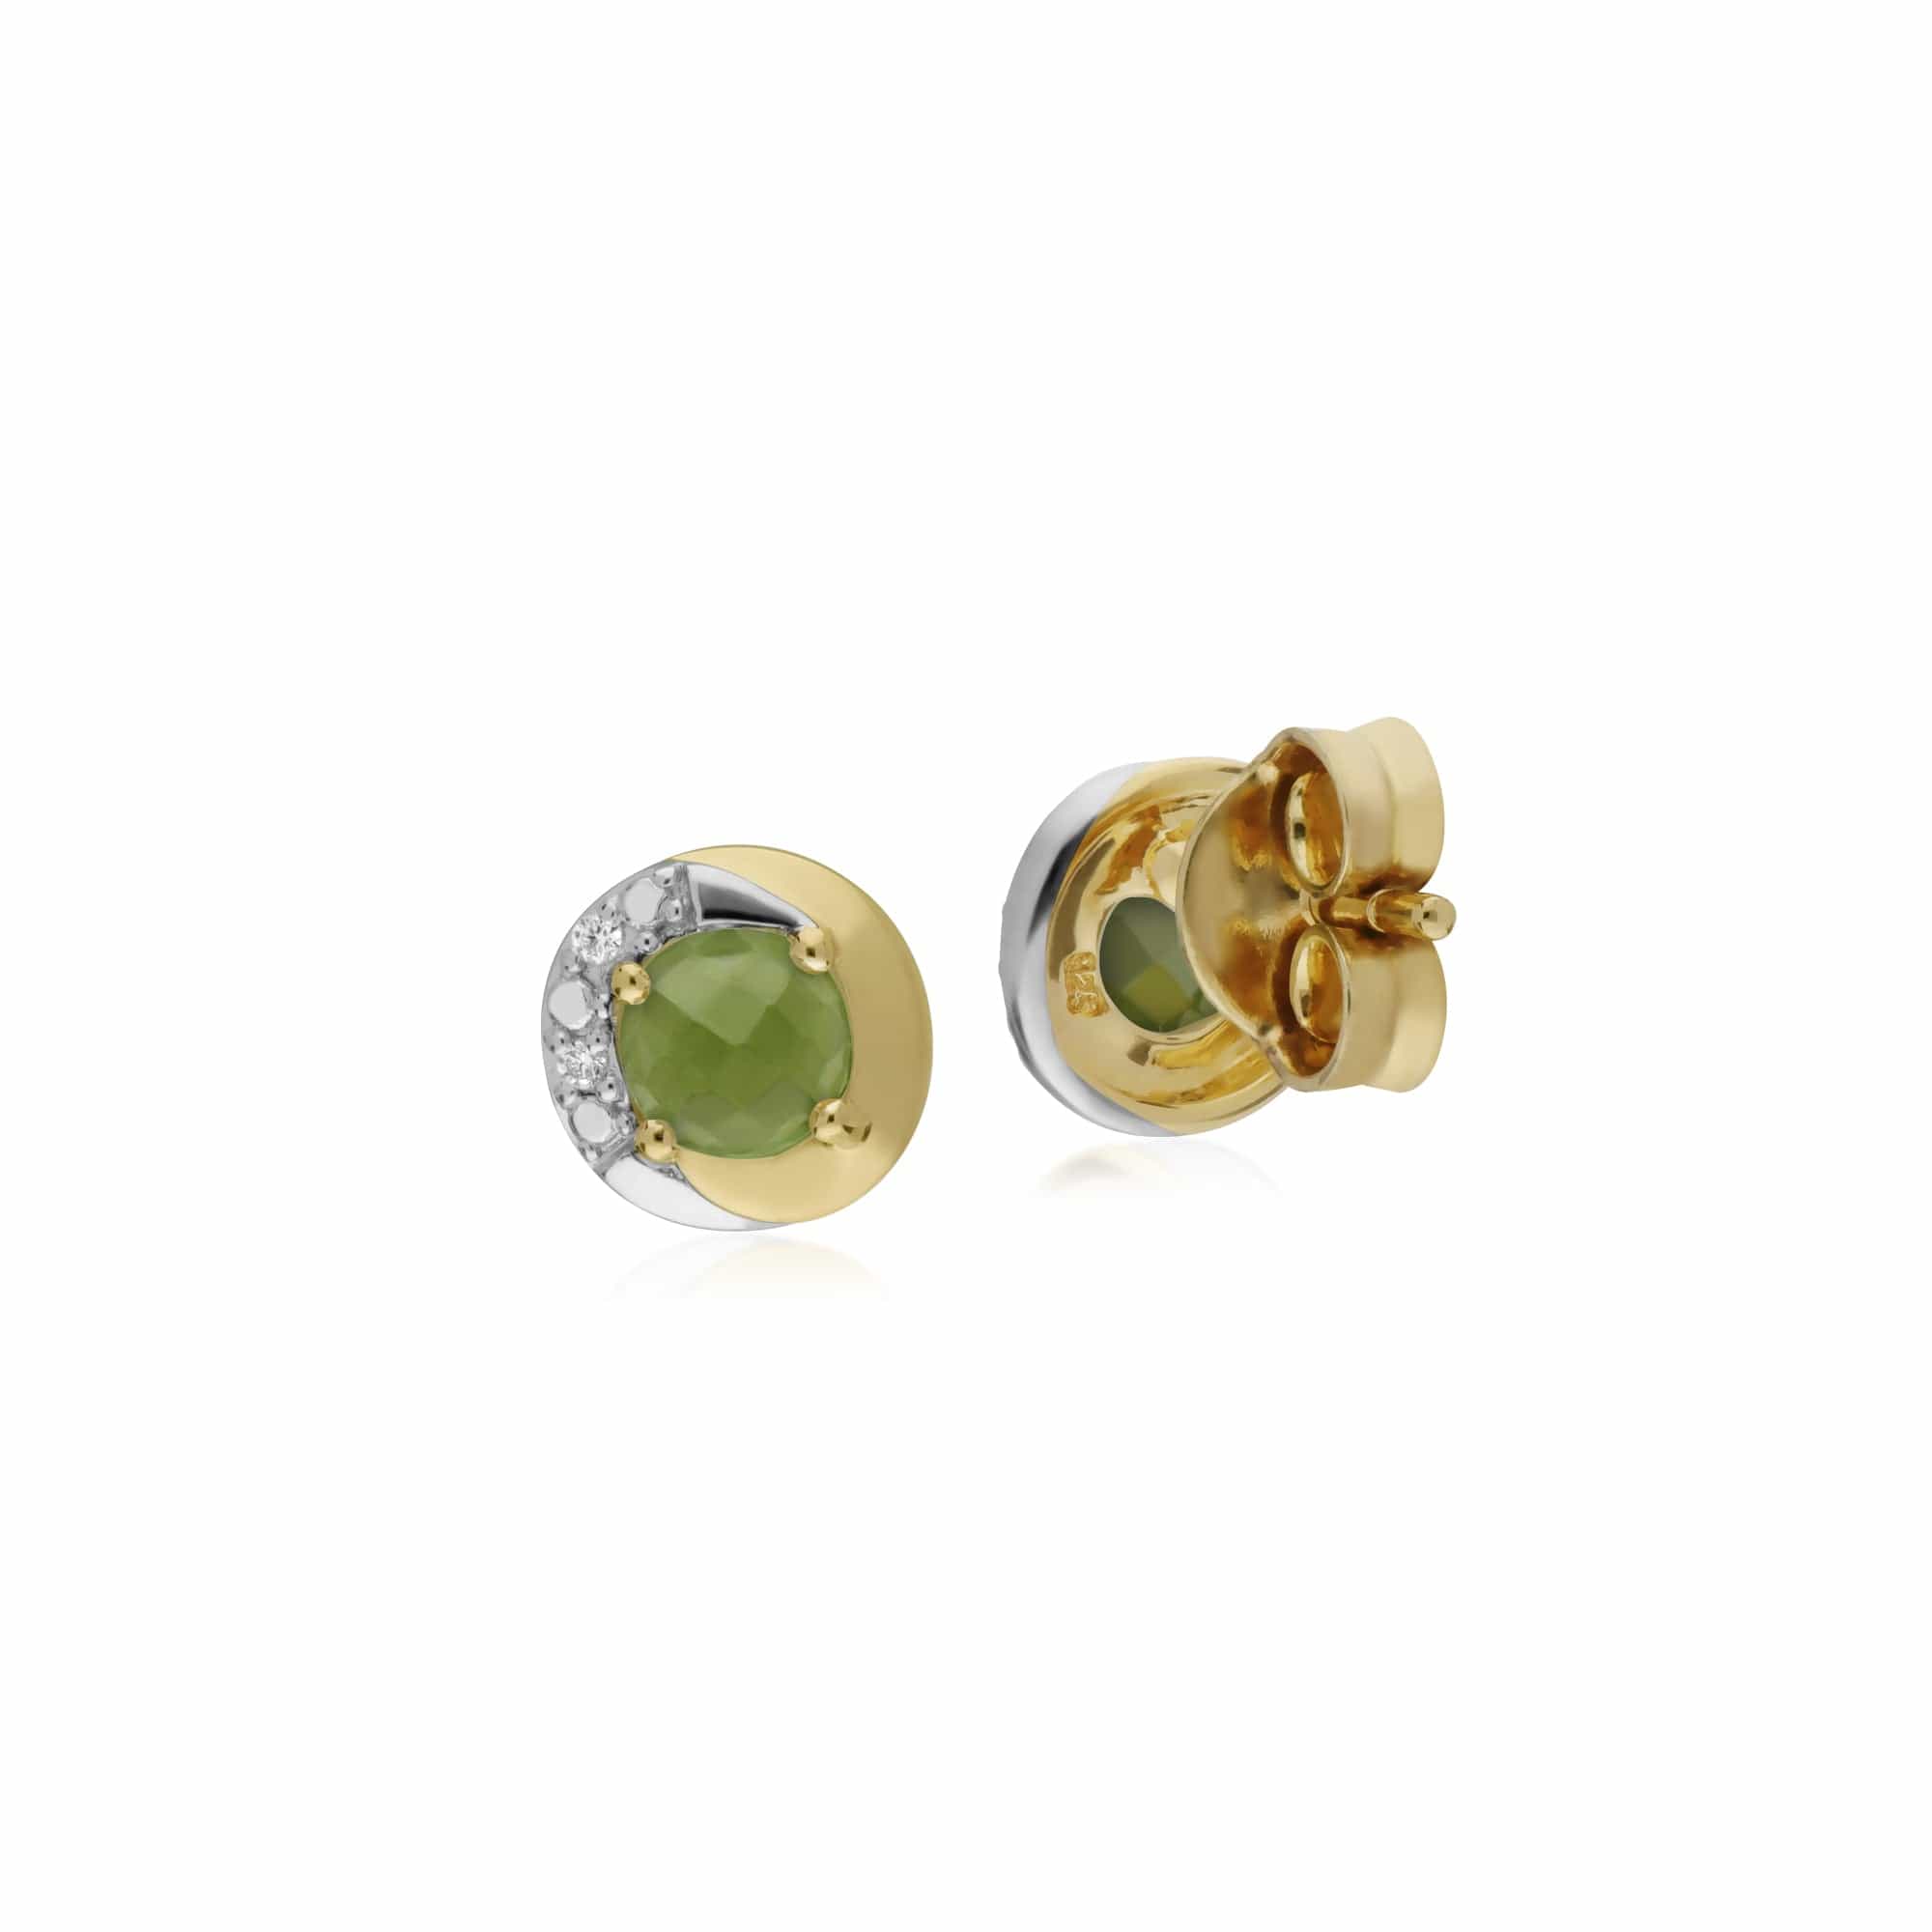 135E1560049 Classic Style Round Peridot Stud Earrings in Two Tone 9ct Yellow Gold 2